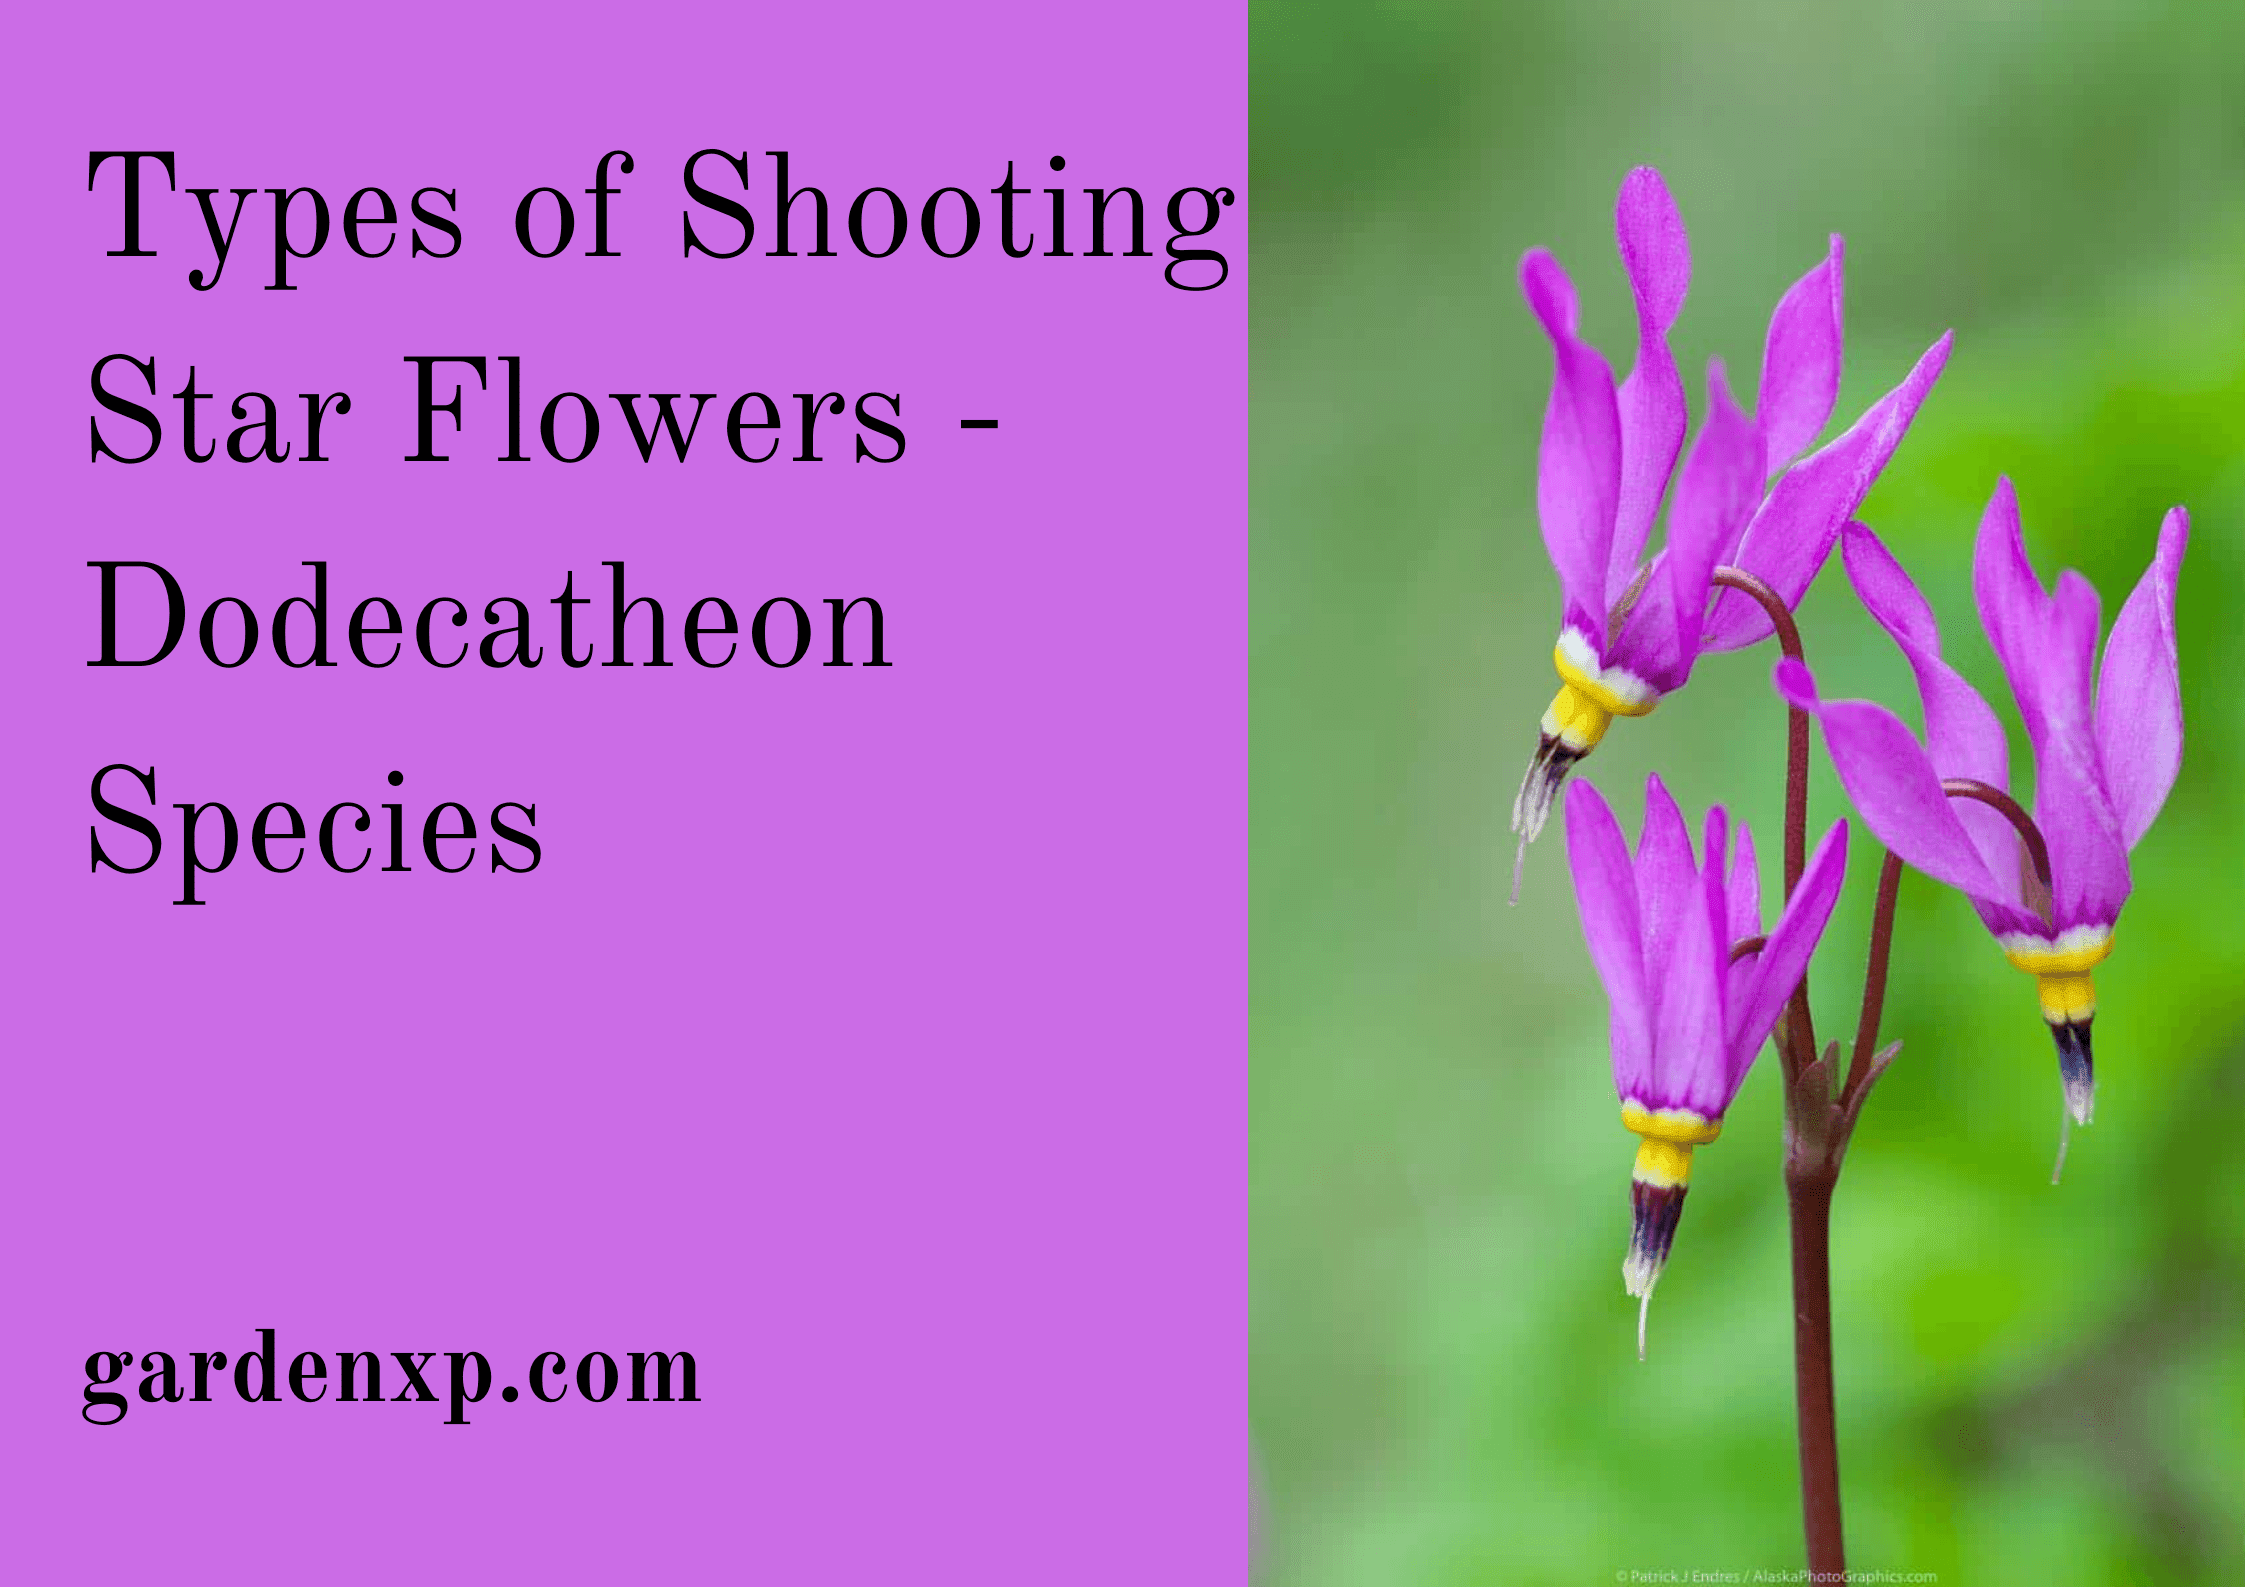 Type of Shooting Star Flowers - Dodecatheon Species